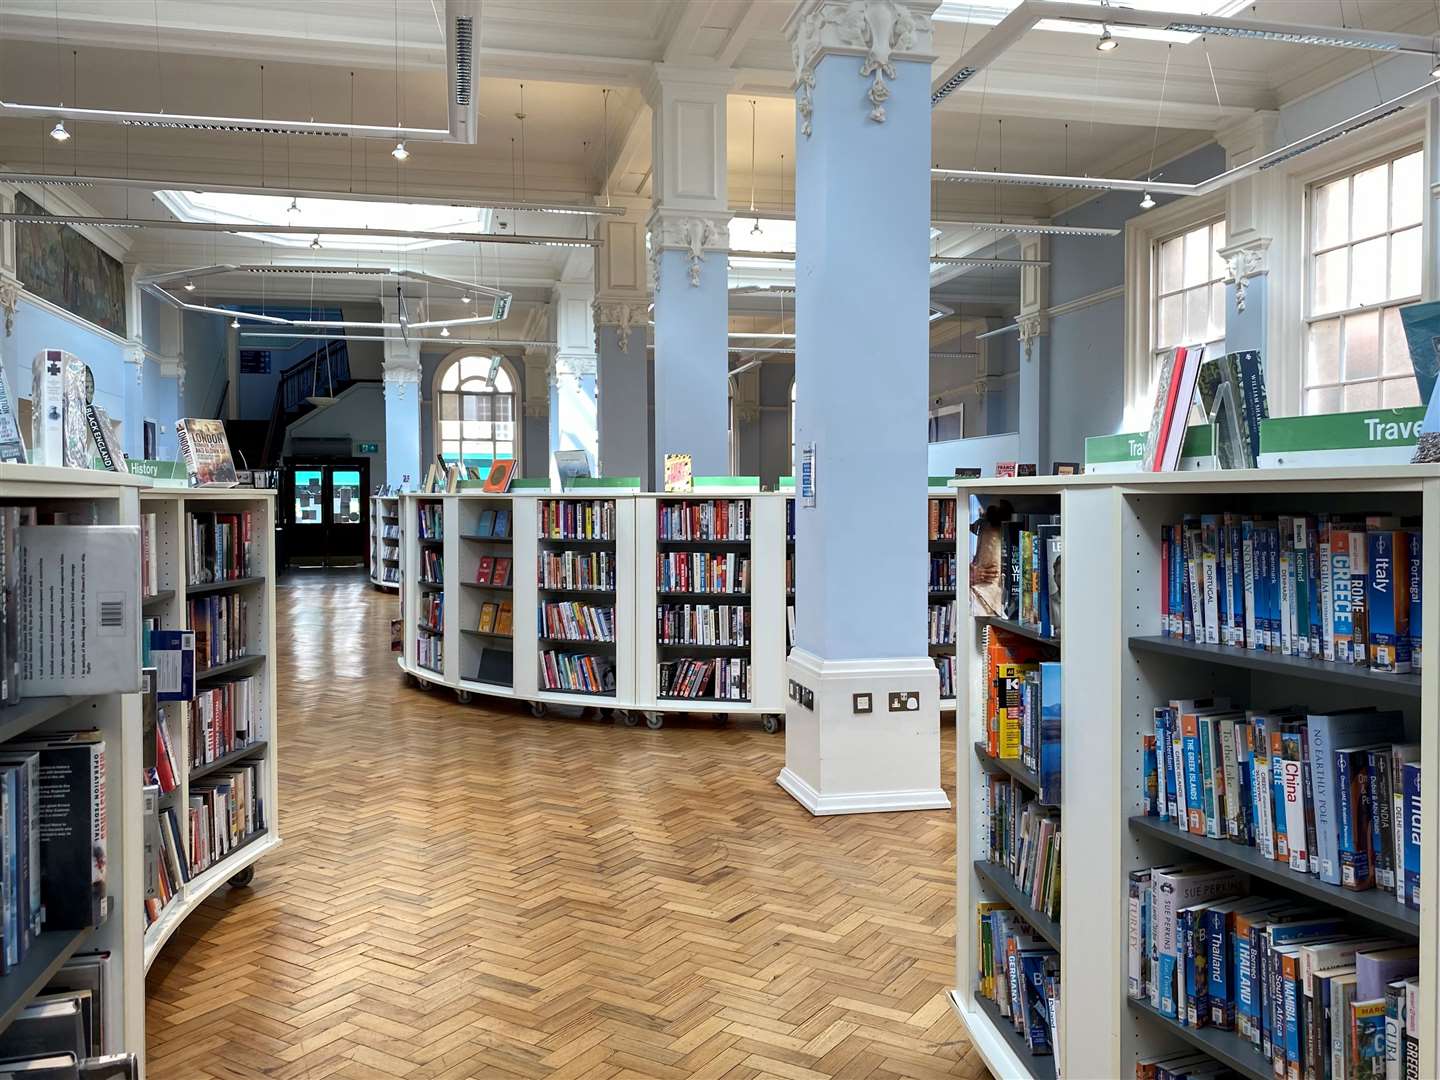 Inside Gravesend Library in Windmill Street, Gravesend. Picture: Cara Simmonds